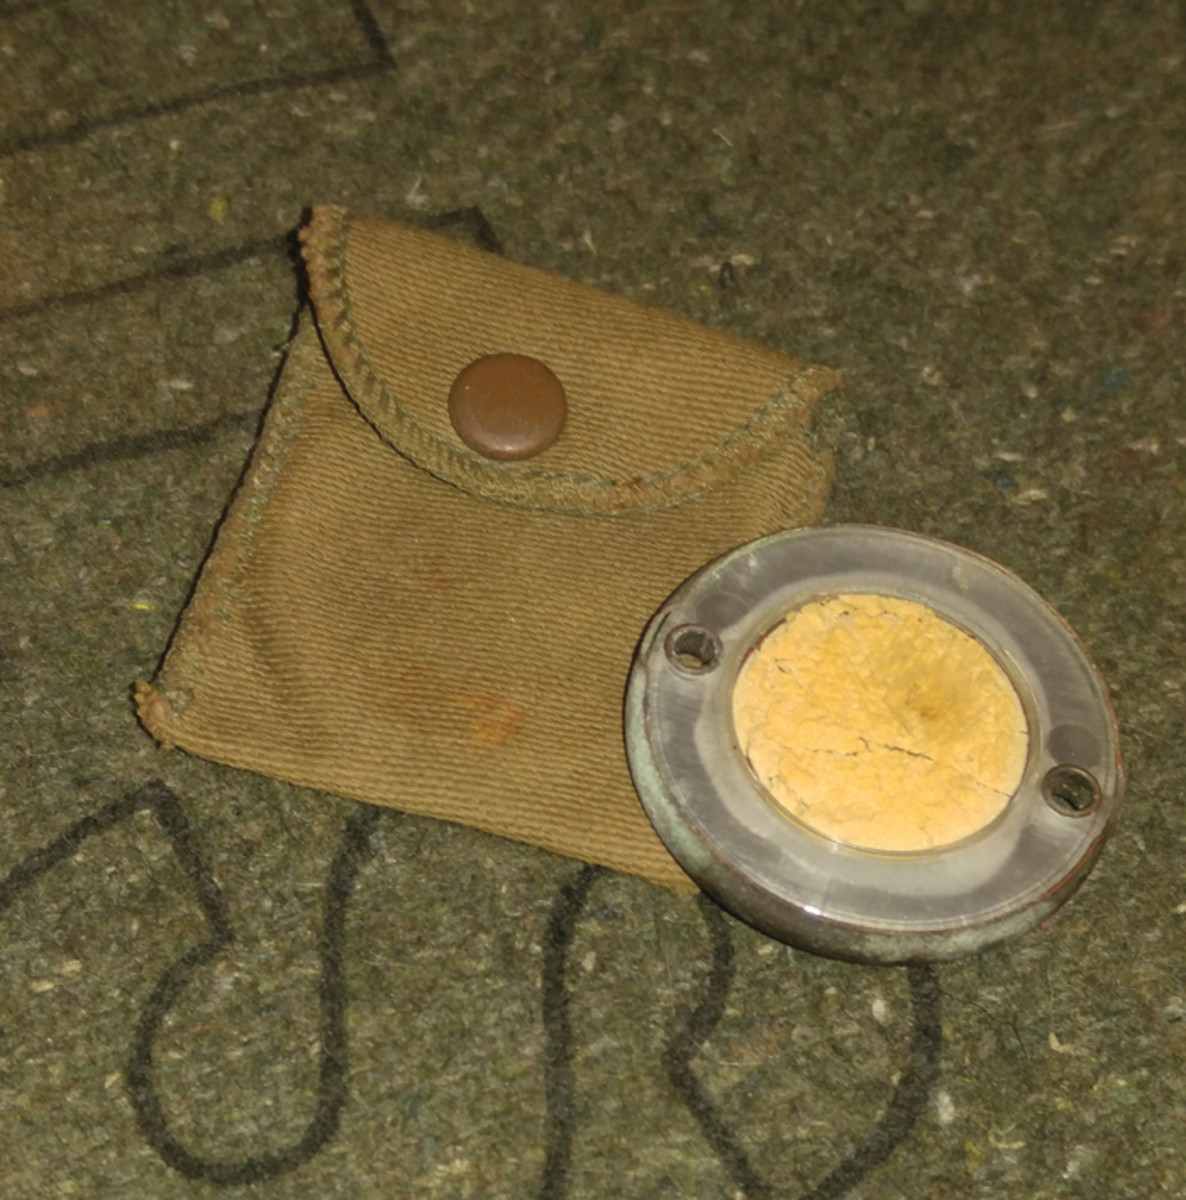 Not a cyanide tablet as the seller described, but rather, a WWII luminous, radioactive disc used for identification purposes.